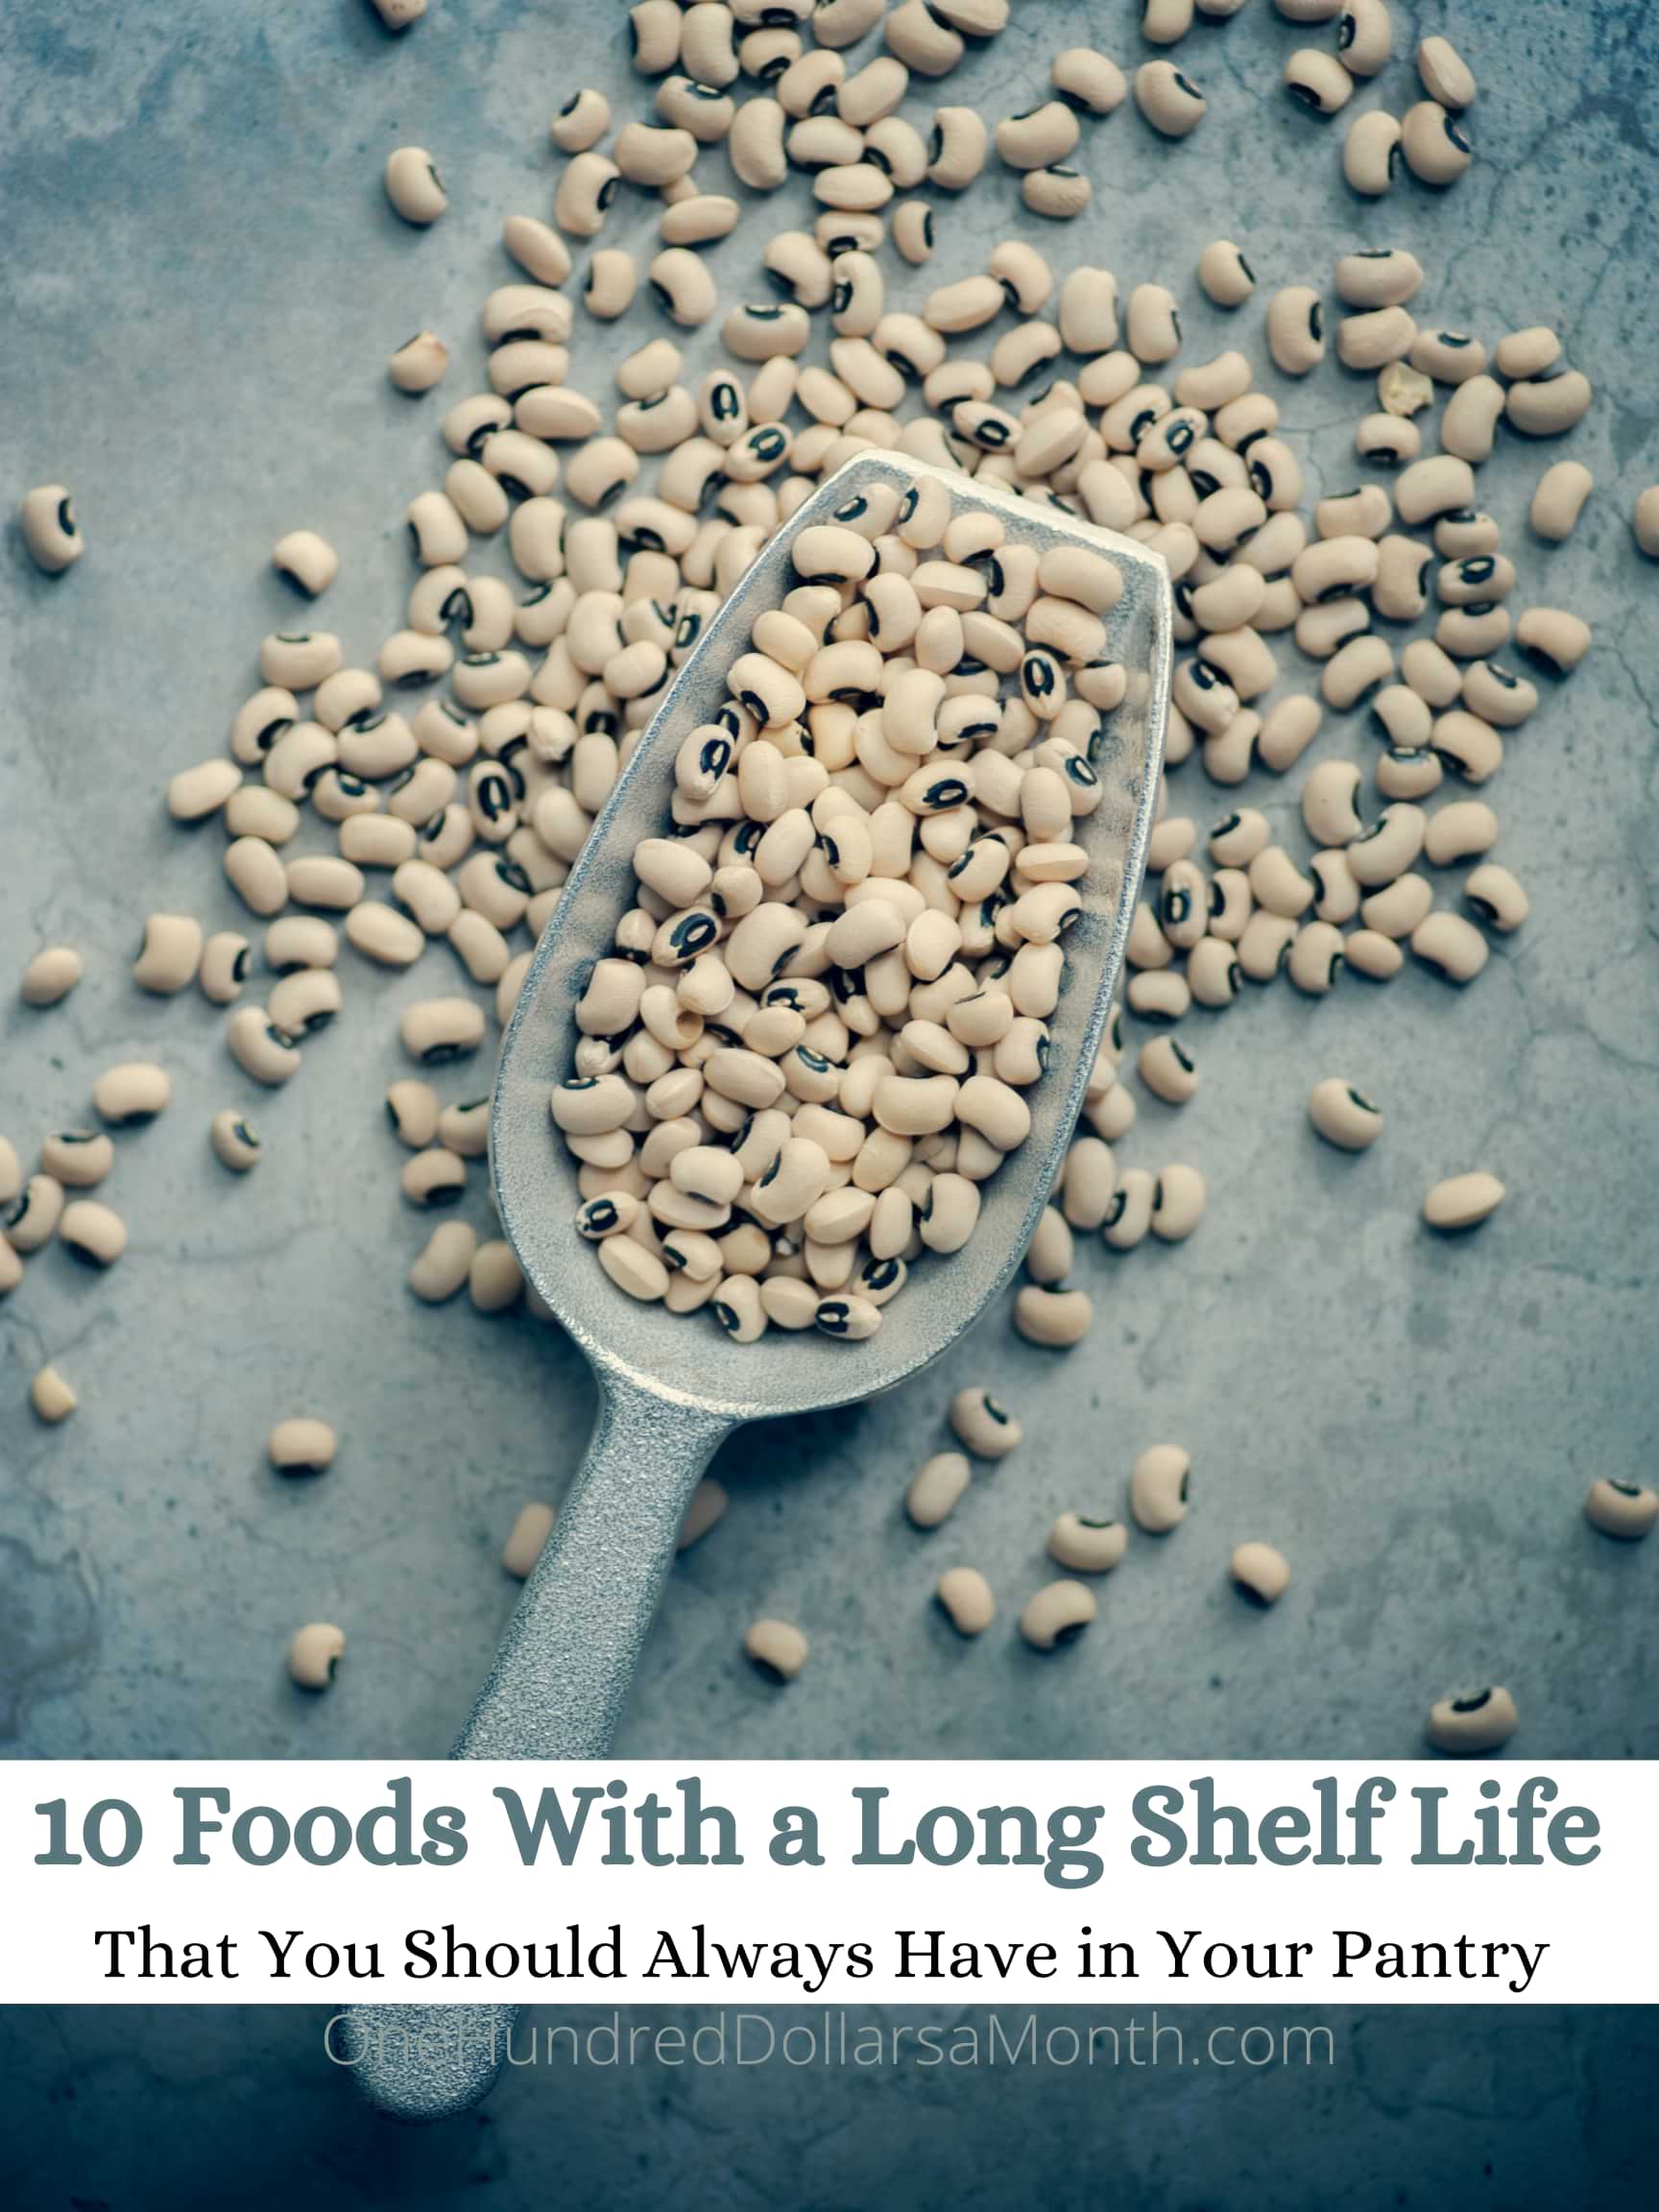 10 Foods With a Long Shelf Life {That You Should Always Have in Your Pantry}